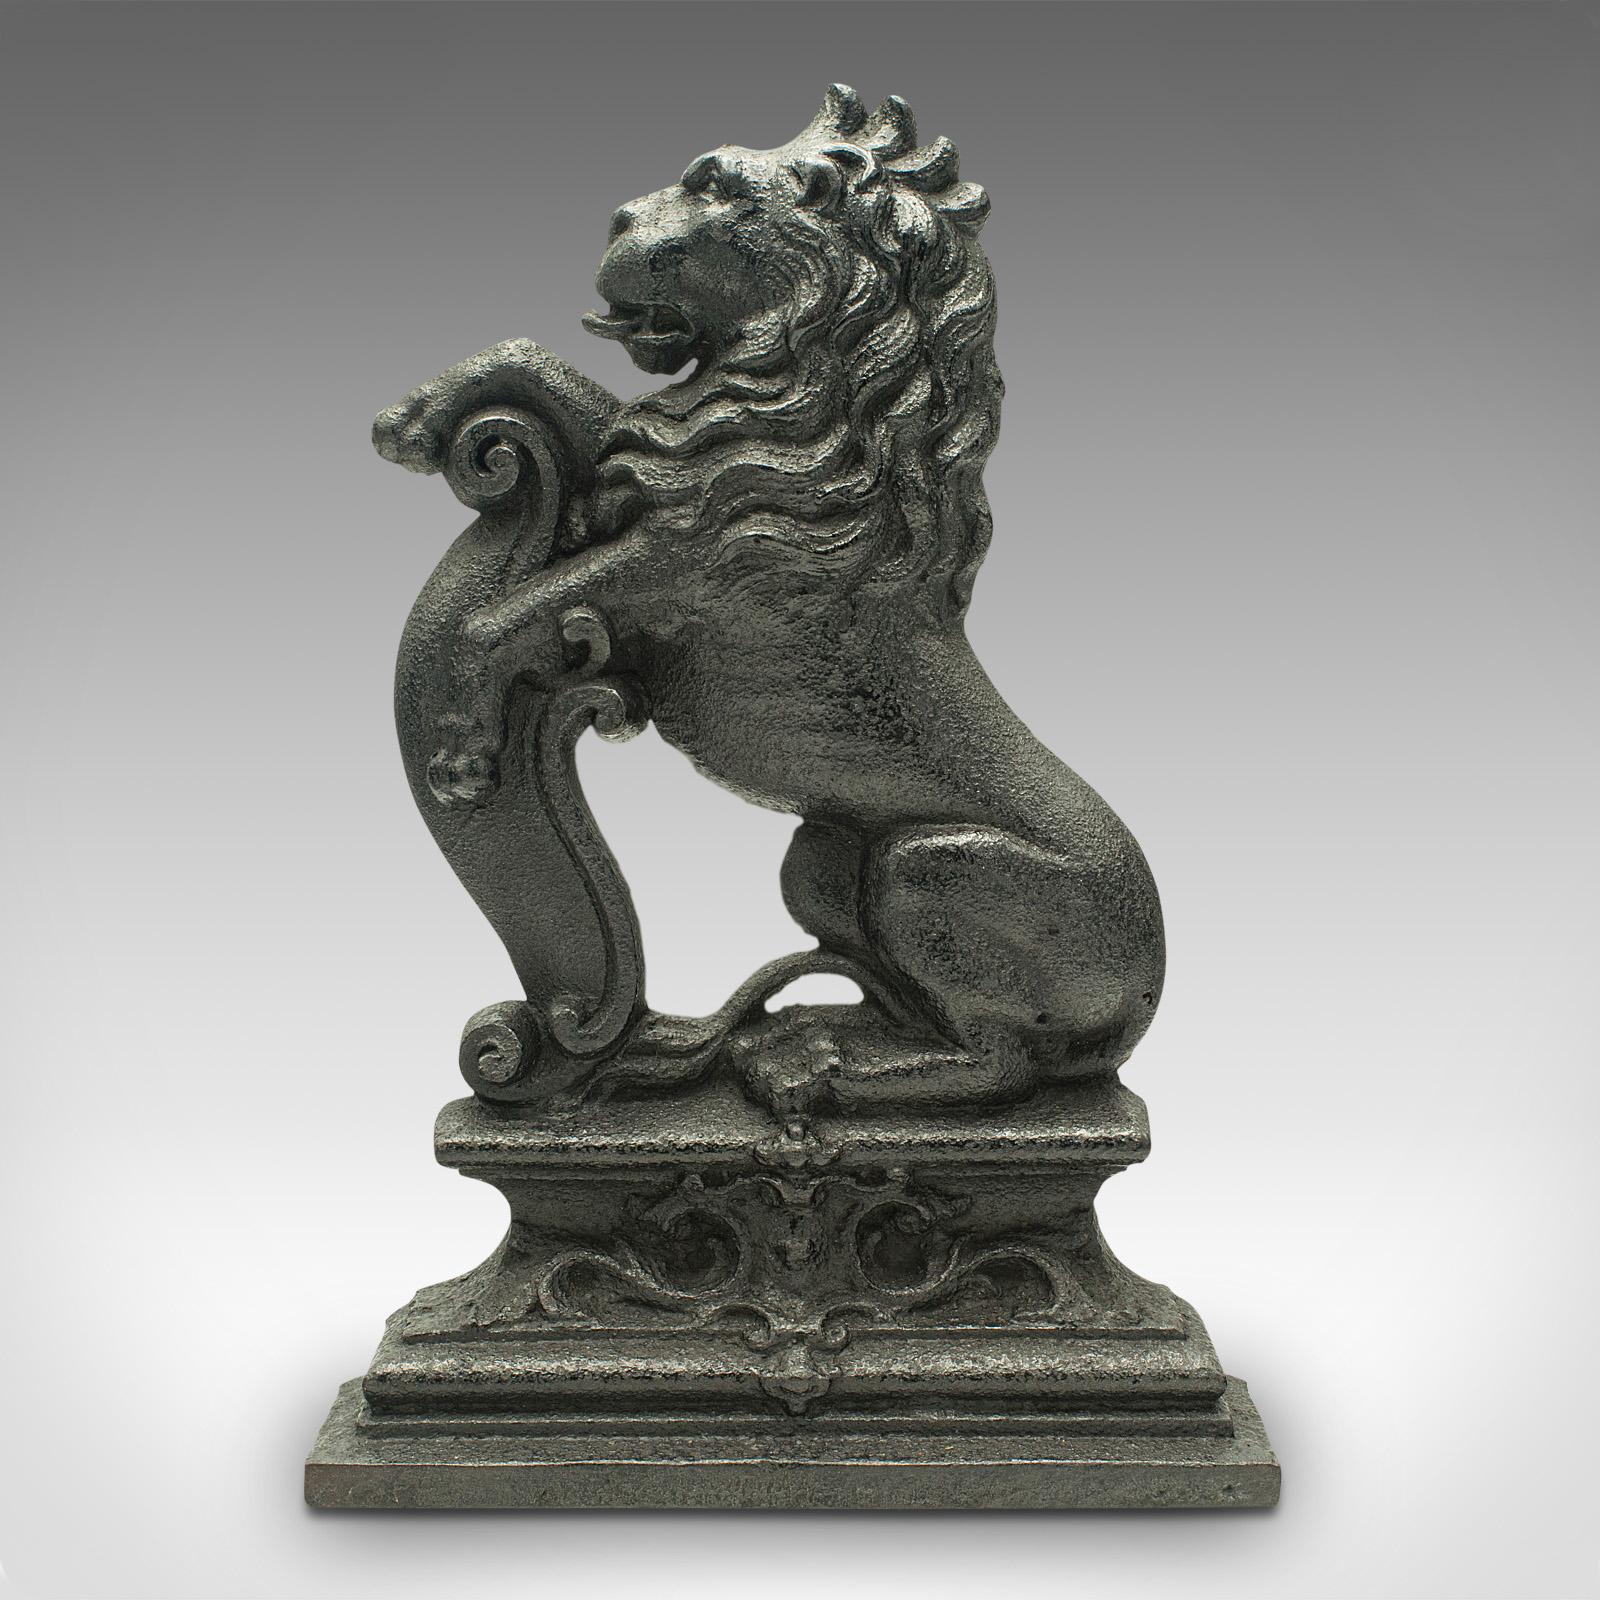 This is an antique Lion Rampant doorstop. An English, cast iron decorative heraldic door keeper, dating to the Victorian period, circa 1870.

Robust and generously sized, with iconic lion form
Displays a desirable aged patina and in good